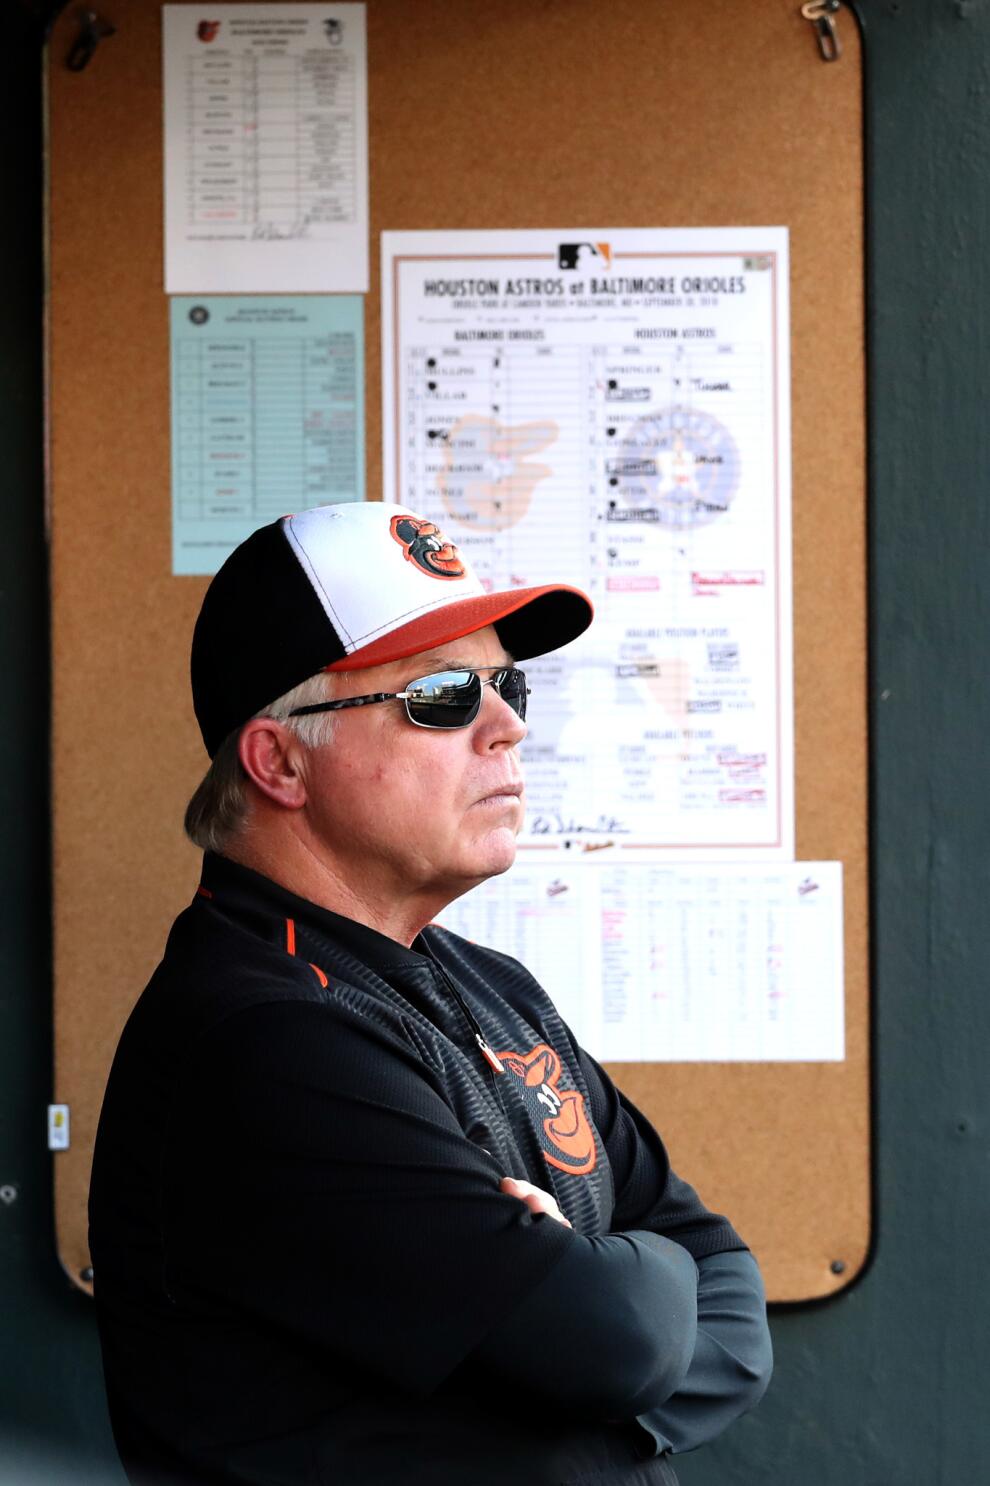 The Future of Baltimore Orioles Manager Buck Showalter